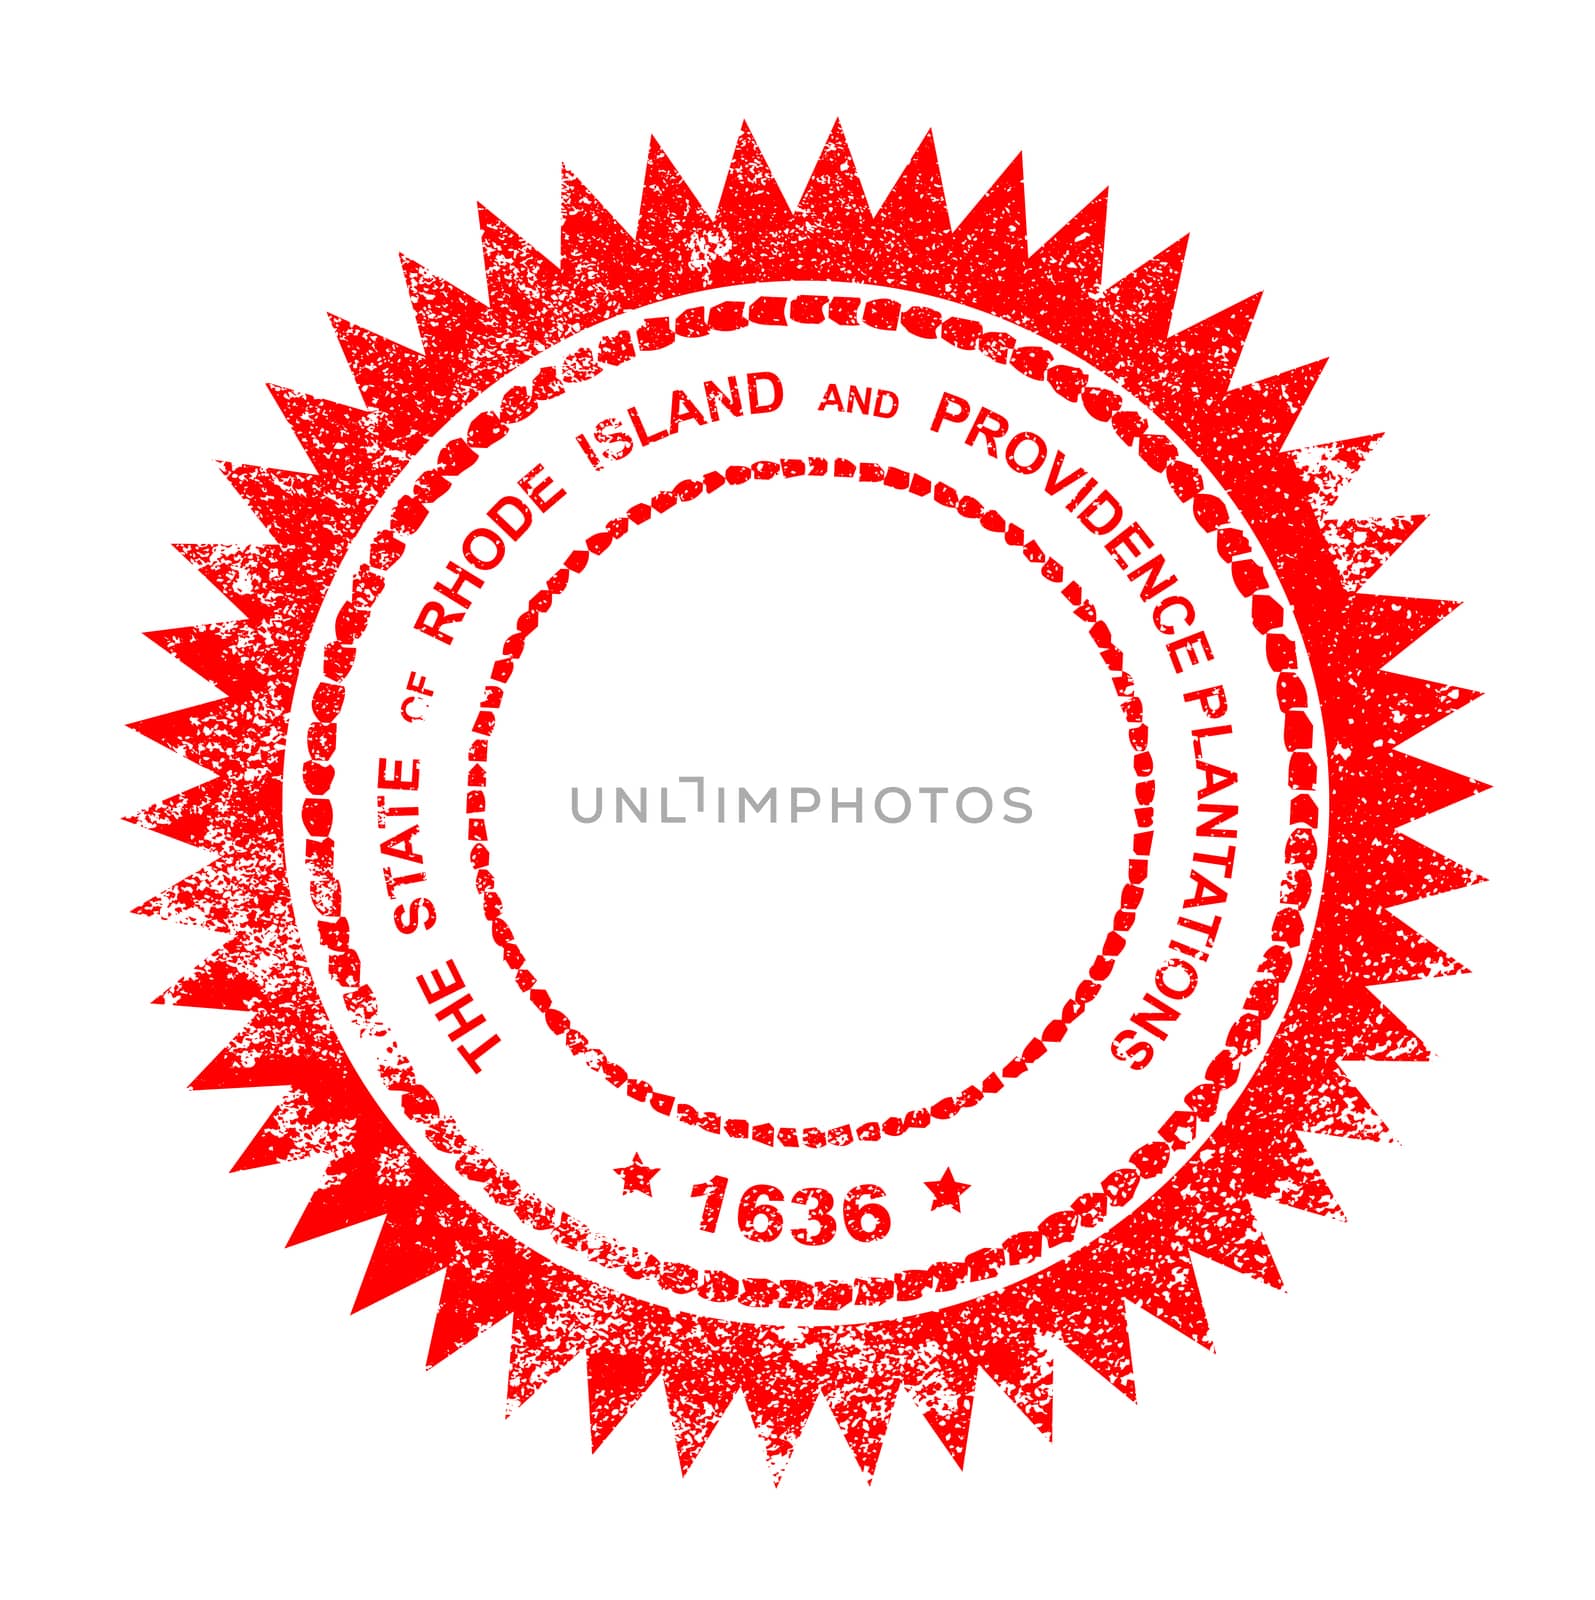 The State Seal of Rhode Island rubber red ink stamp on a white background